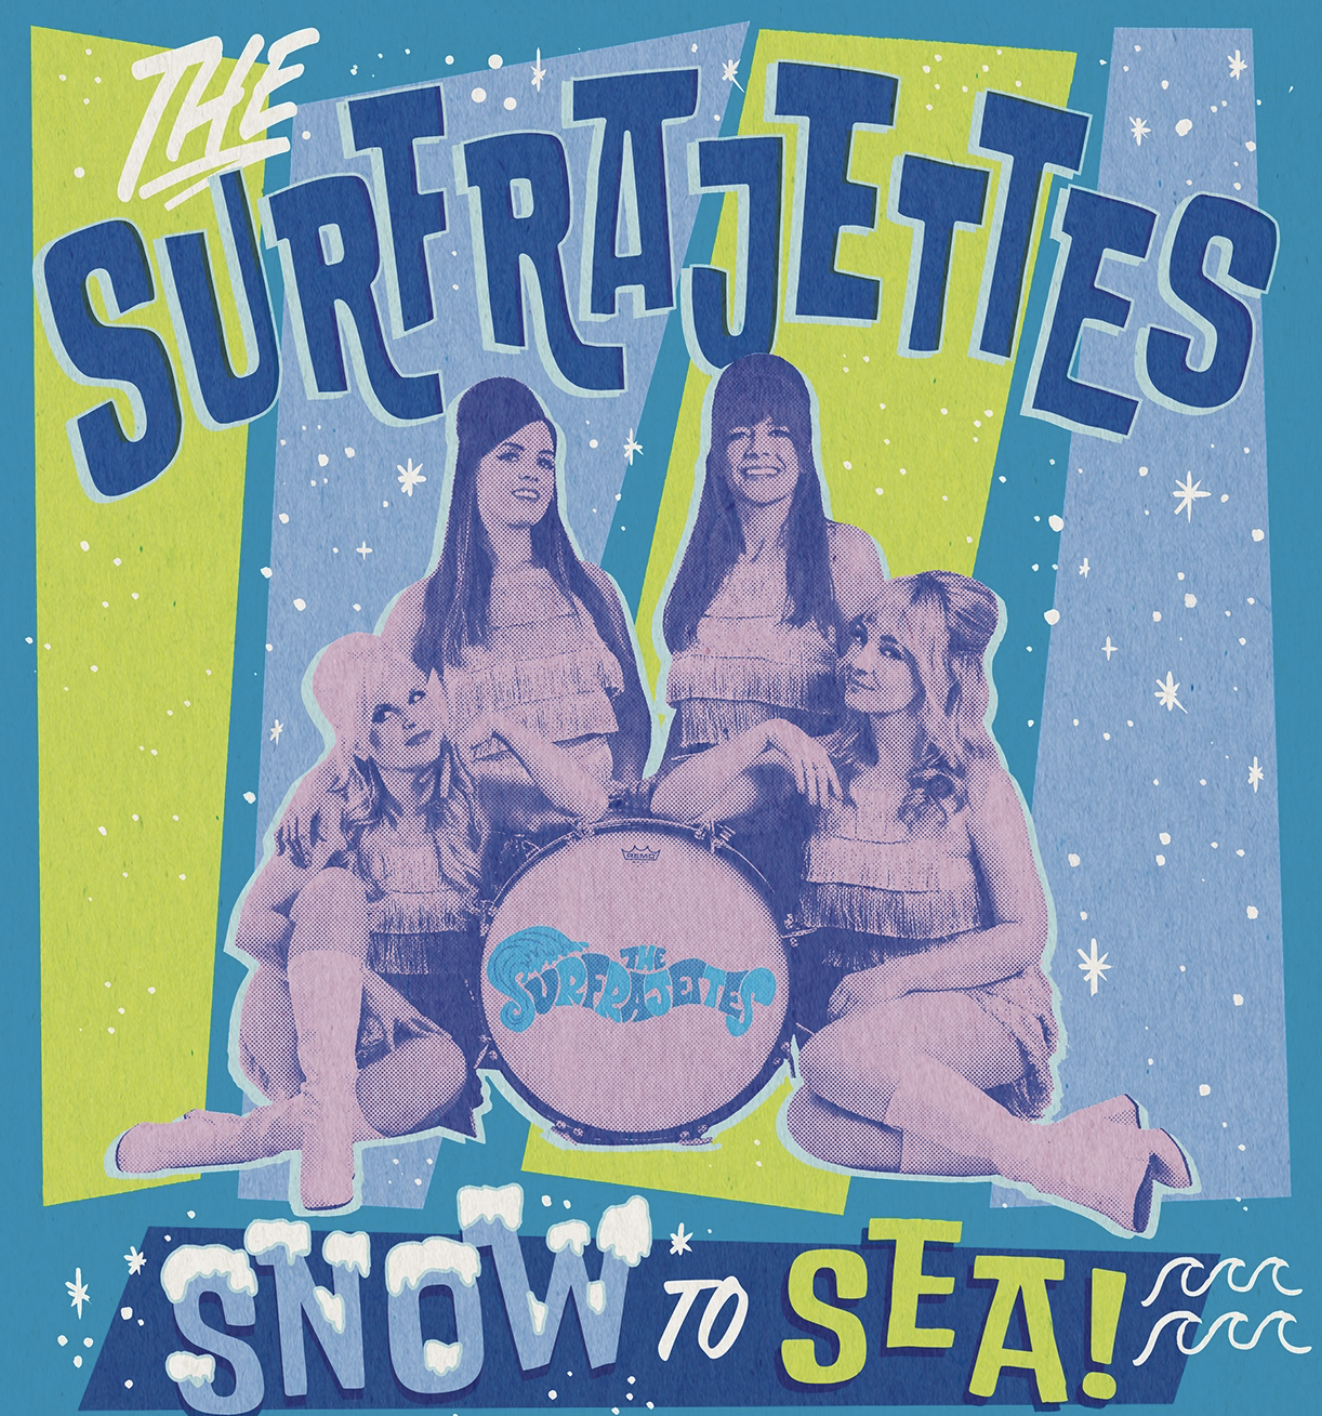 THE SURFRAJETTES